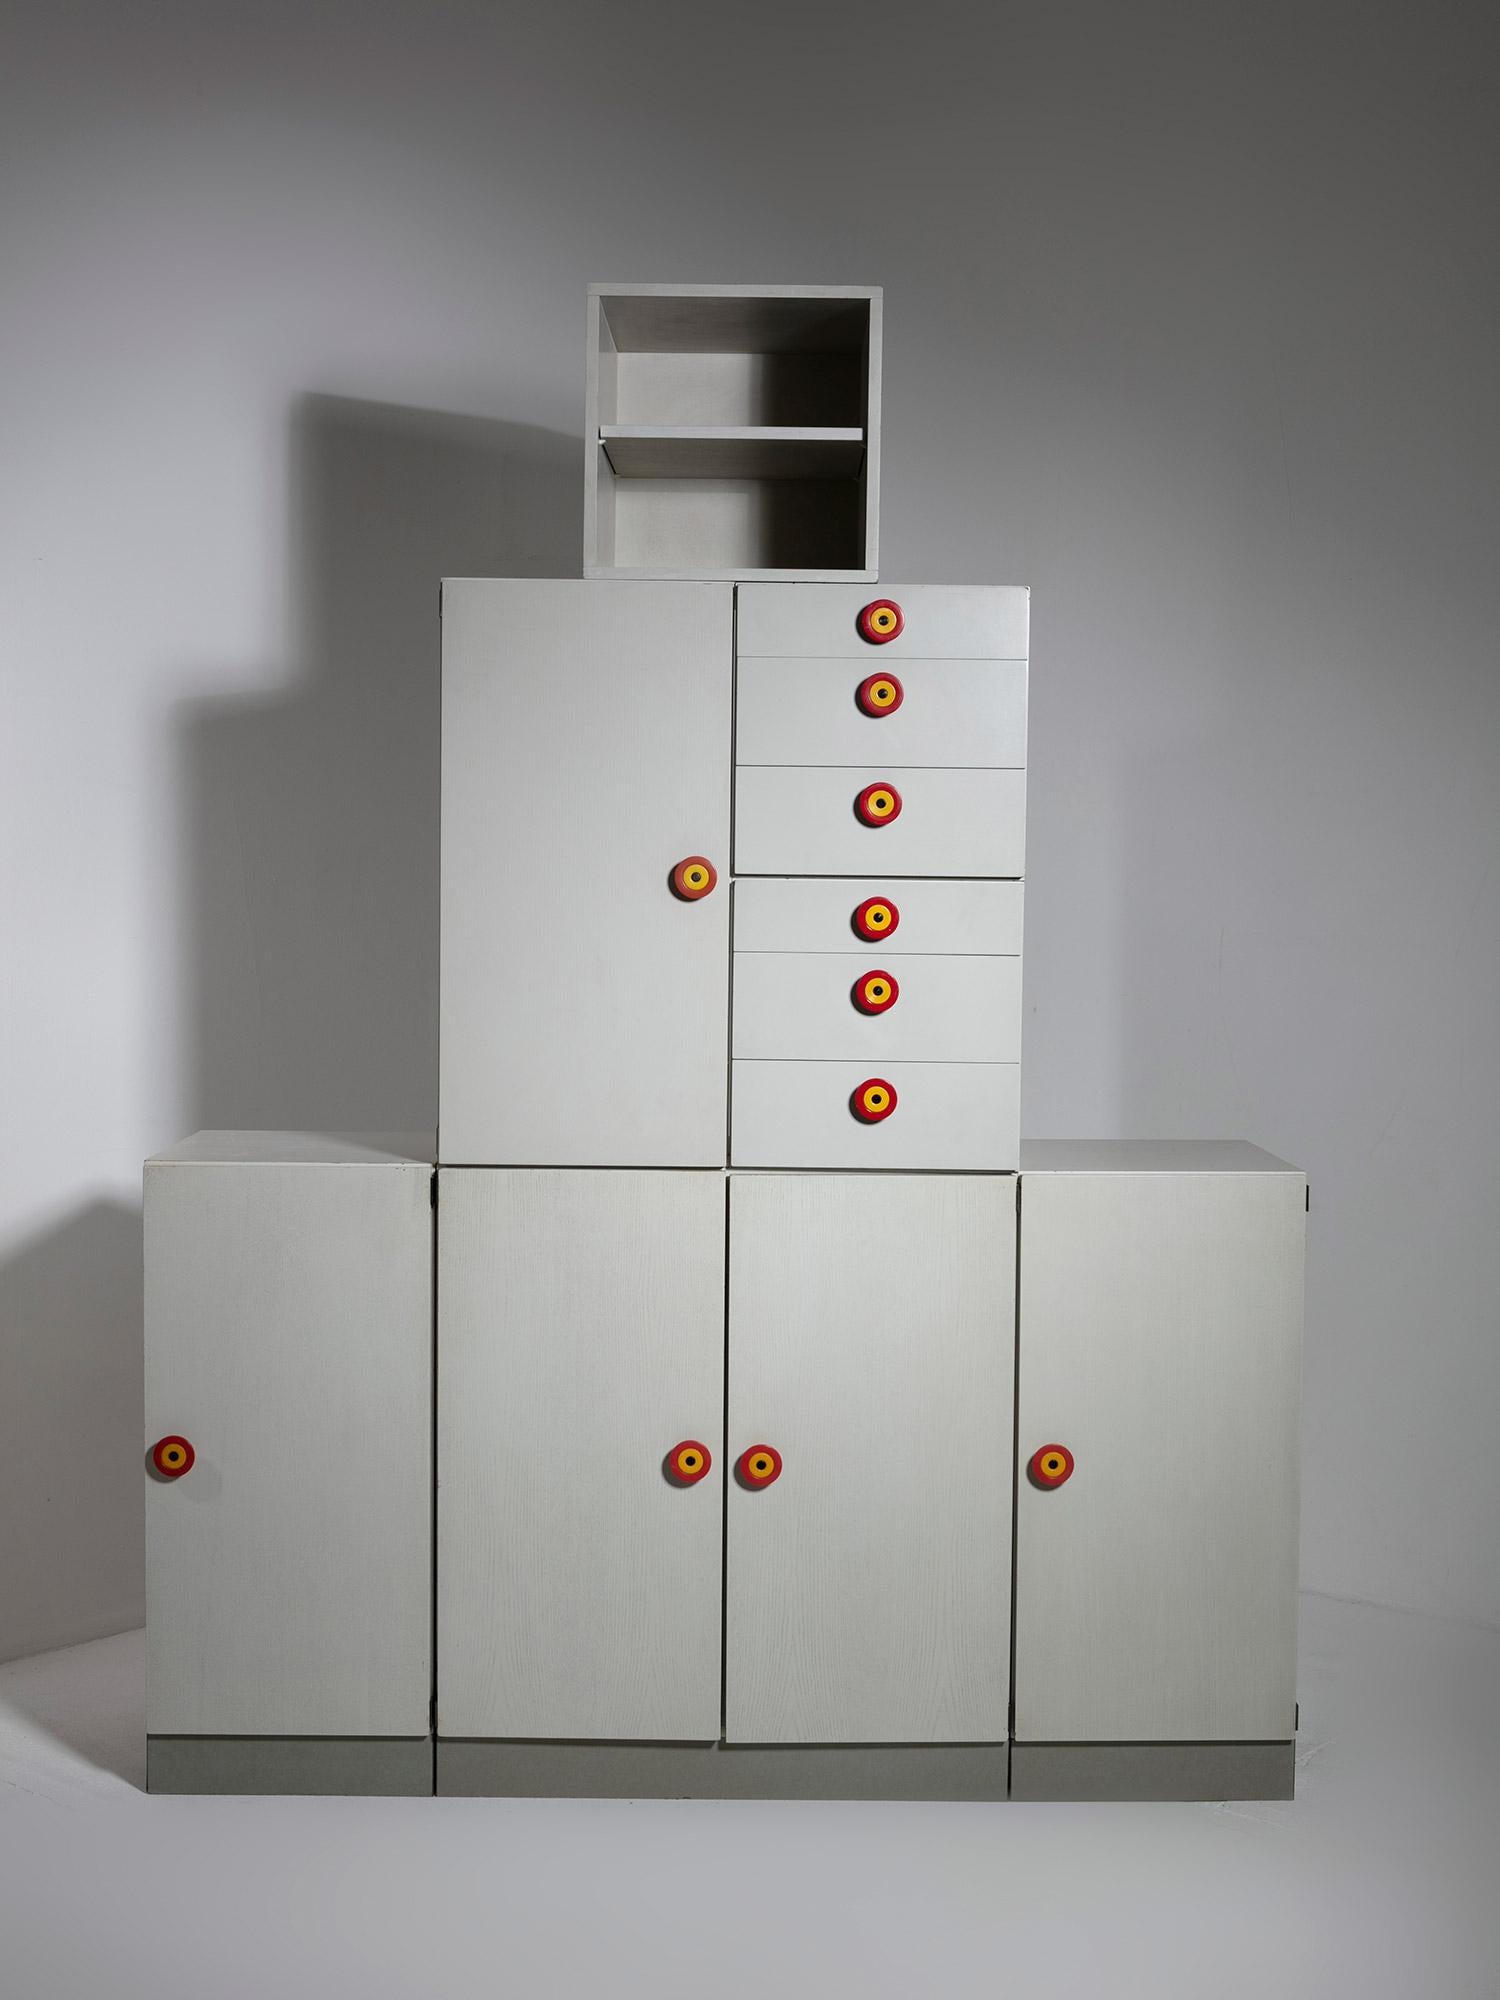 Scarce set of 7 Kubirolo modular shelving system by Ettore Sottsass for Poltronova.
The elements can be positioned in several ways, from full horizontal to vertical, creating different landscapes.
The size refers to the configuration of the first